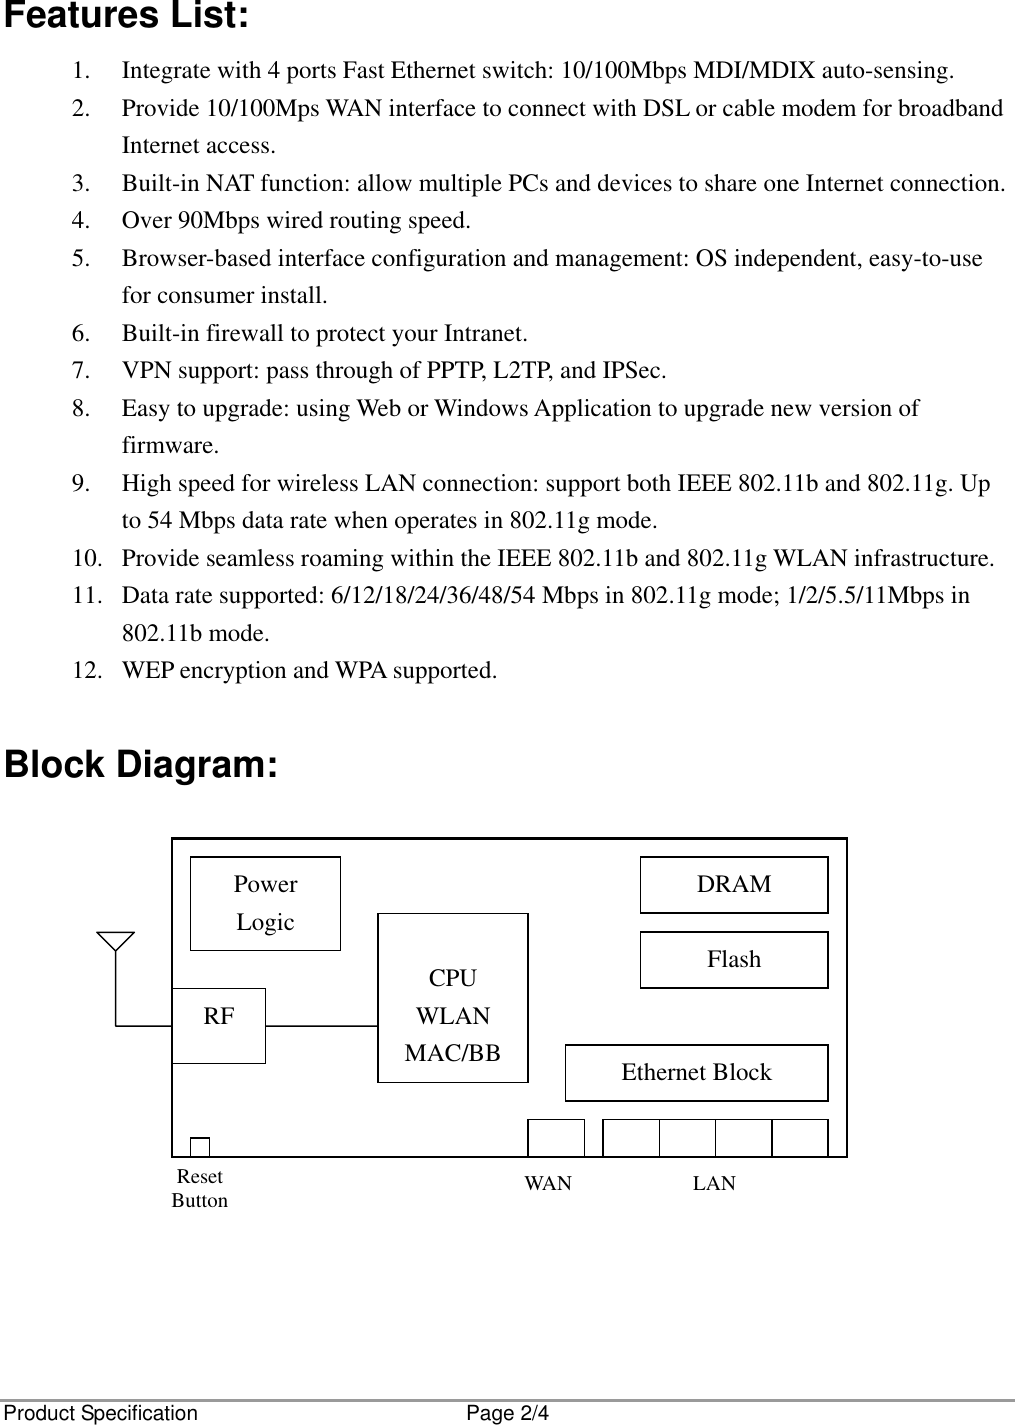 Product Specification  Page 2/4  Features List: 1.  Integrate with 4 ports Fast Ethernet switch: 10/100Mbps MDI/MDIX auto-sensing. 2.  Provide 10/100Mps WAN interface to connect with DSL or cable modem for broadband Internet access. 3.  Built-in NAT function: allow multiple PCs and devices to share one Internet connection. 4.  Over 90Mbps wired routing speed. 5.  Browser-based interface configuration and management: OS independent, easy-to-use for consumer install. 6.  Built-in firewall to protect your Intranet. 7.  VPN support: pass through of PPTP, L2TP, and IPSec. 8.  Easy to upgrade: using Web or Windows Application to upgrade new version of firmware. 9.  High speed for wireless LAN connection: support both IEEE 802.11b and 802.11g. Up to 54 Mbps data rate when operates in 802.11g mode. 10.  Provide seamless roaming within the IEEE 802.11b and 802.11g WLAN infrastructure. 11.  Data rate supported: 6/12/18/24/36/48/54 Mbps in 802.11g mode; 1/2/5.5/11Mbps in 802.11b mode. 12.  WEP encryption and WPA supported.  Block Diagram:              Power Logic   CPU WLAN MAC/BB Ethernet Block WAN LANDRAM Flash Reset Button RF 